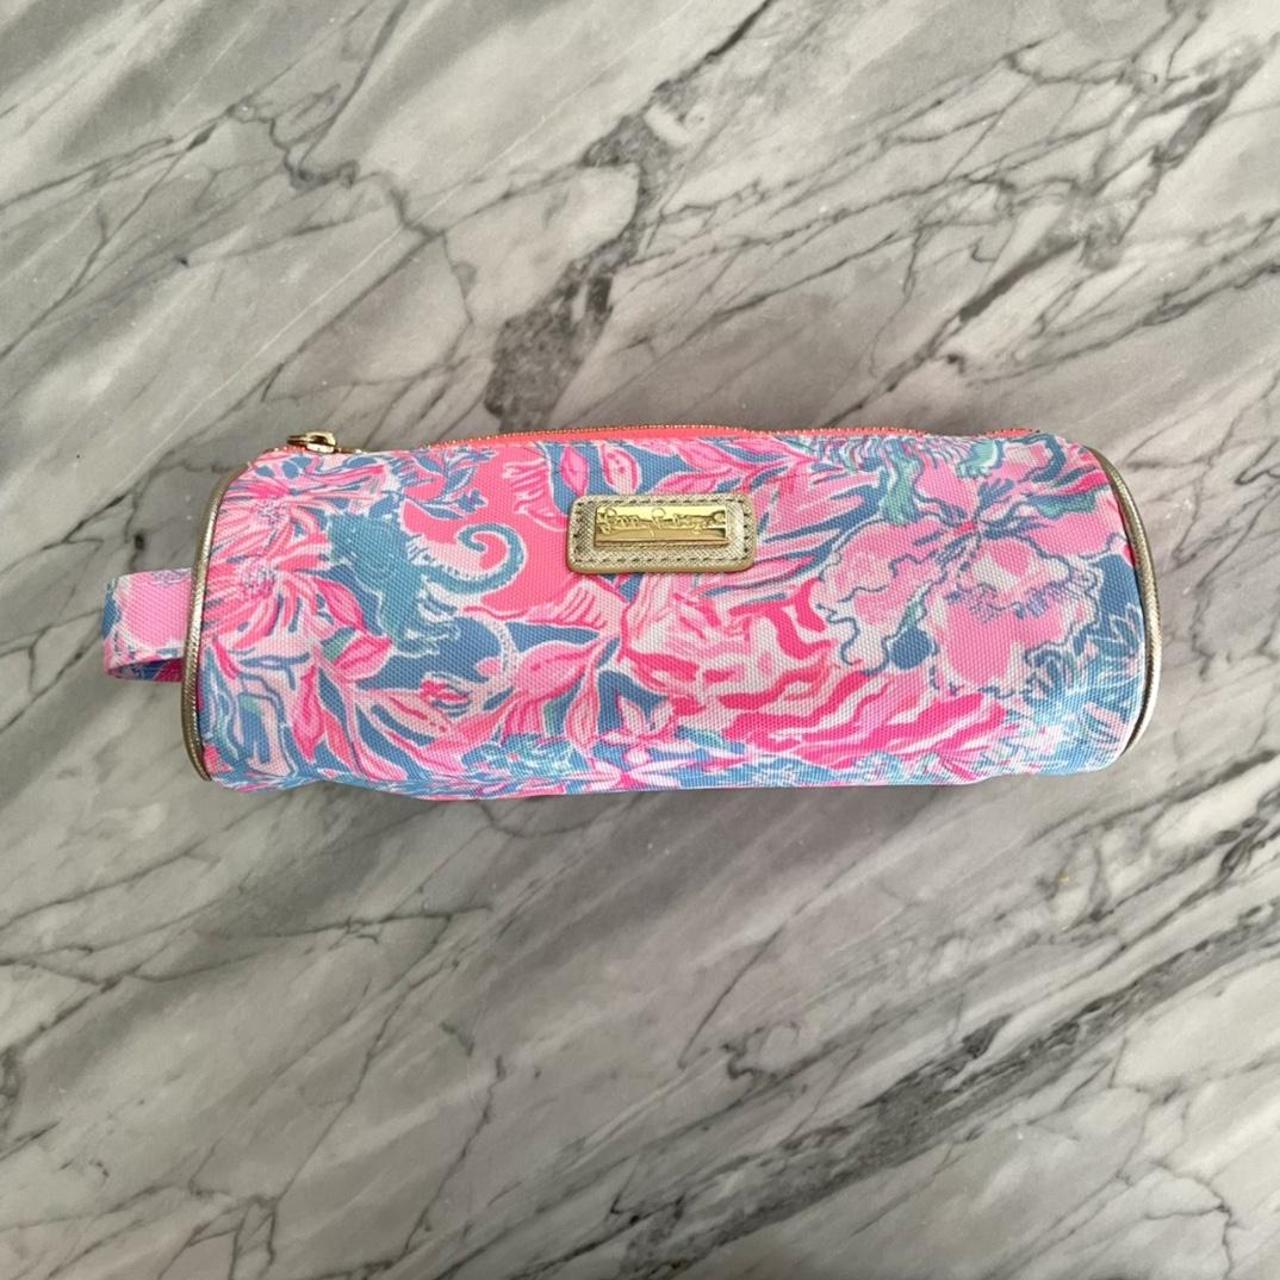 Lilly Pulitzer Women's Multi Bag